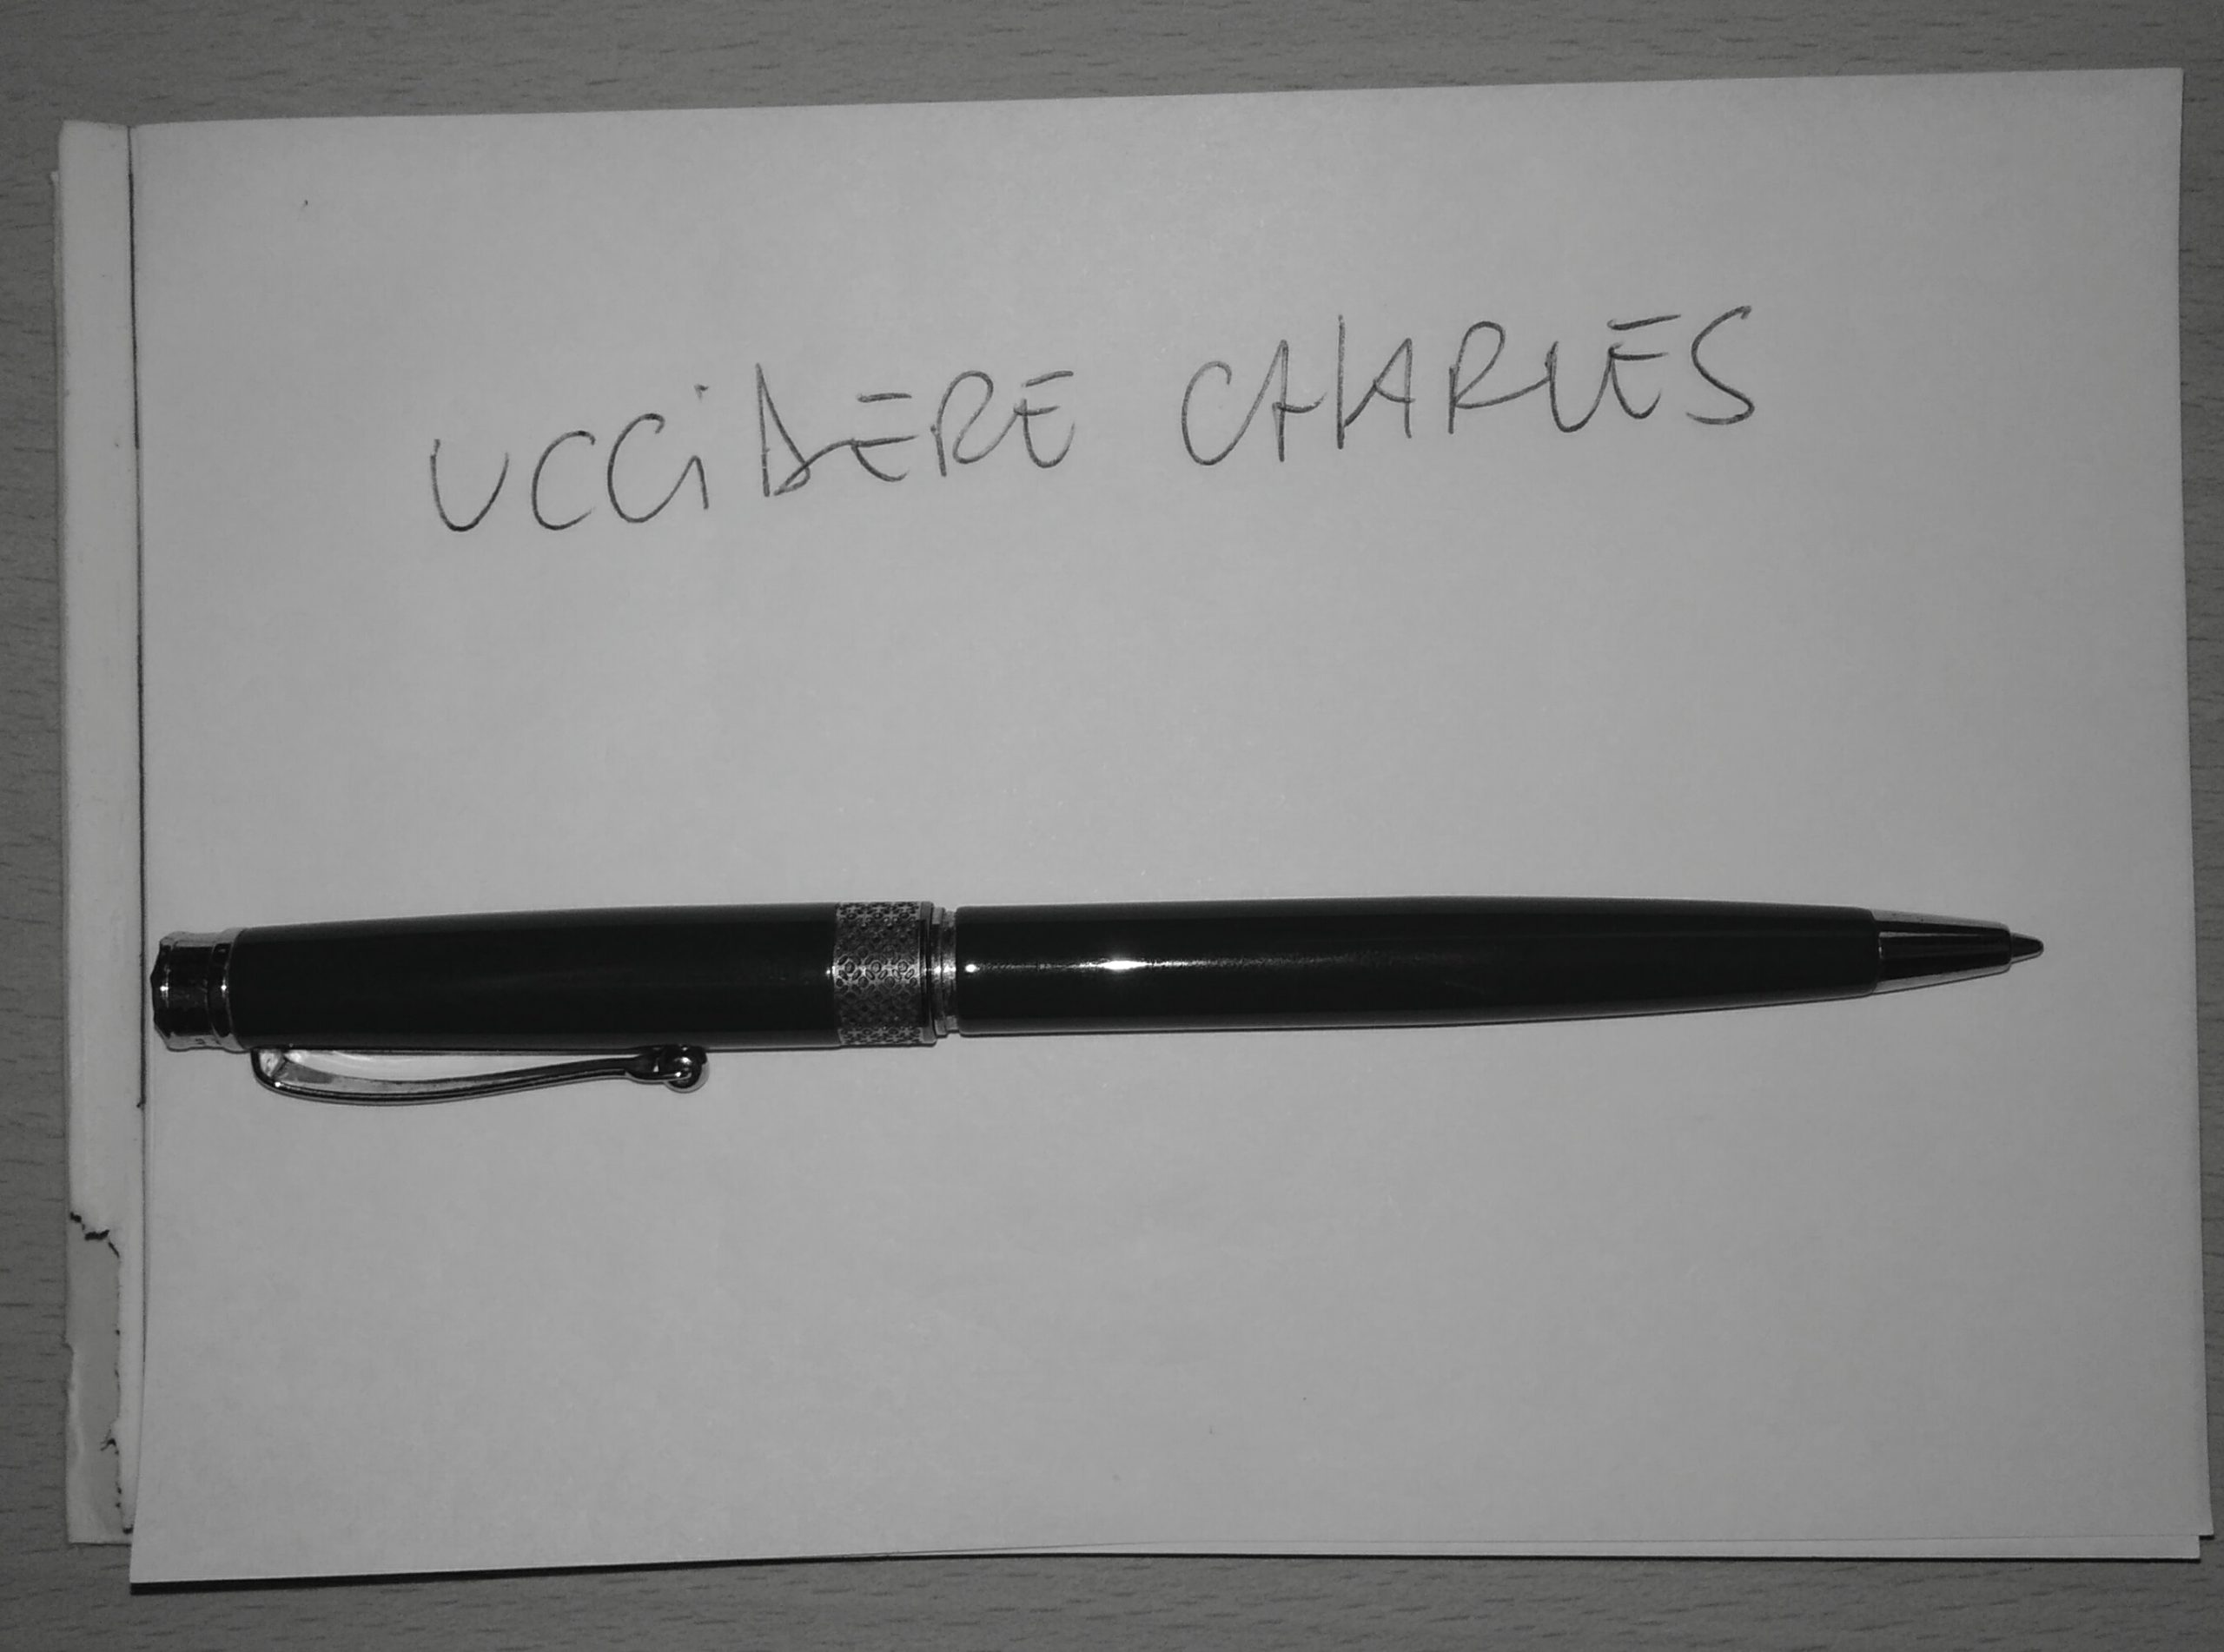 Uccidere Charles